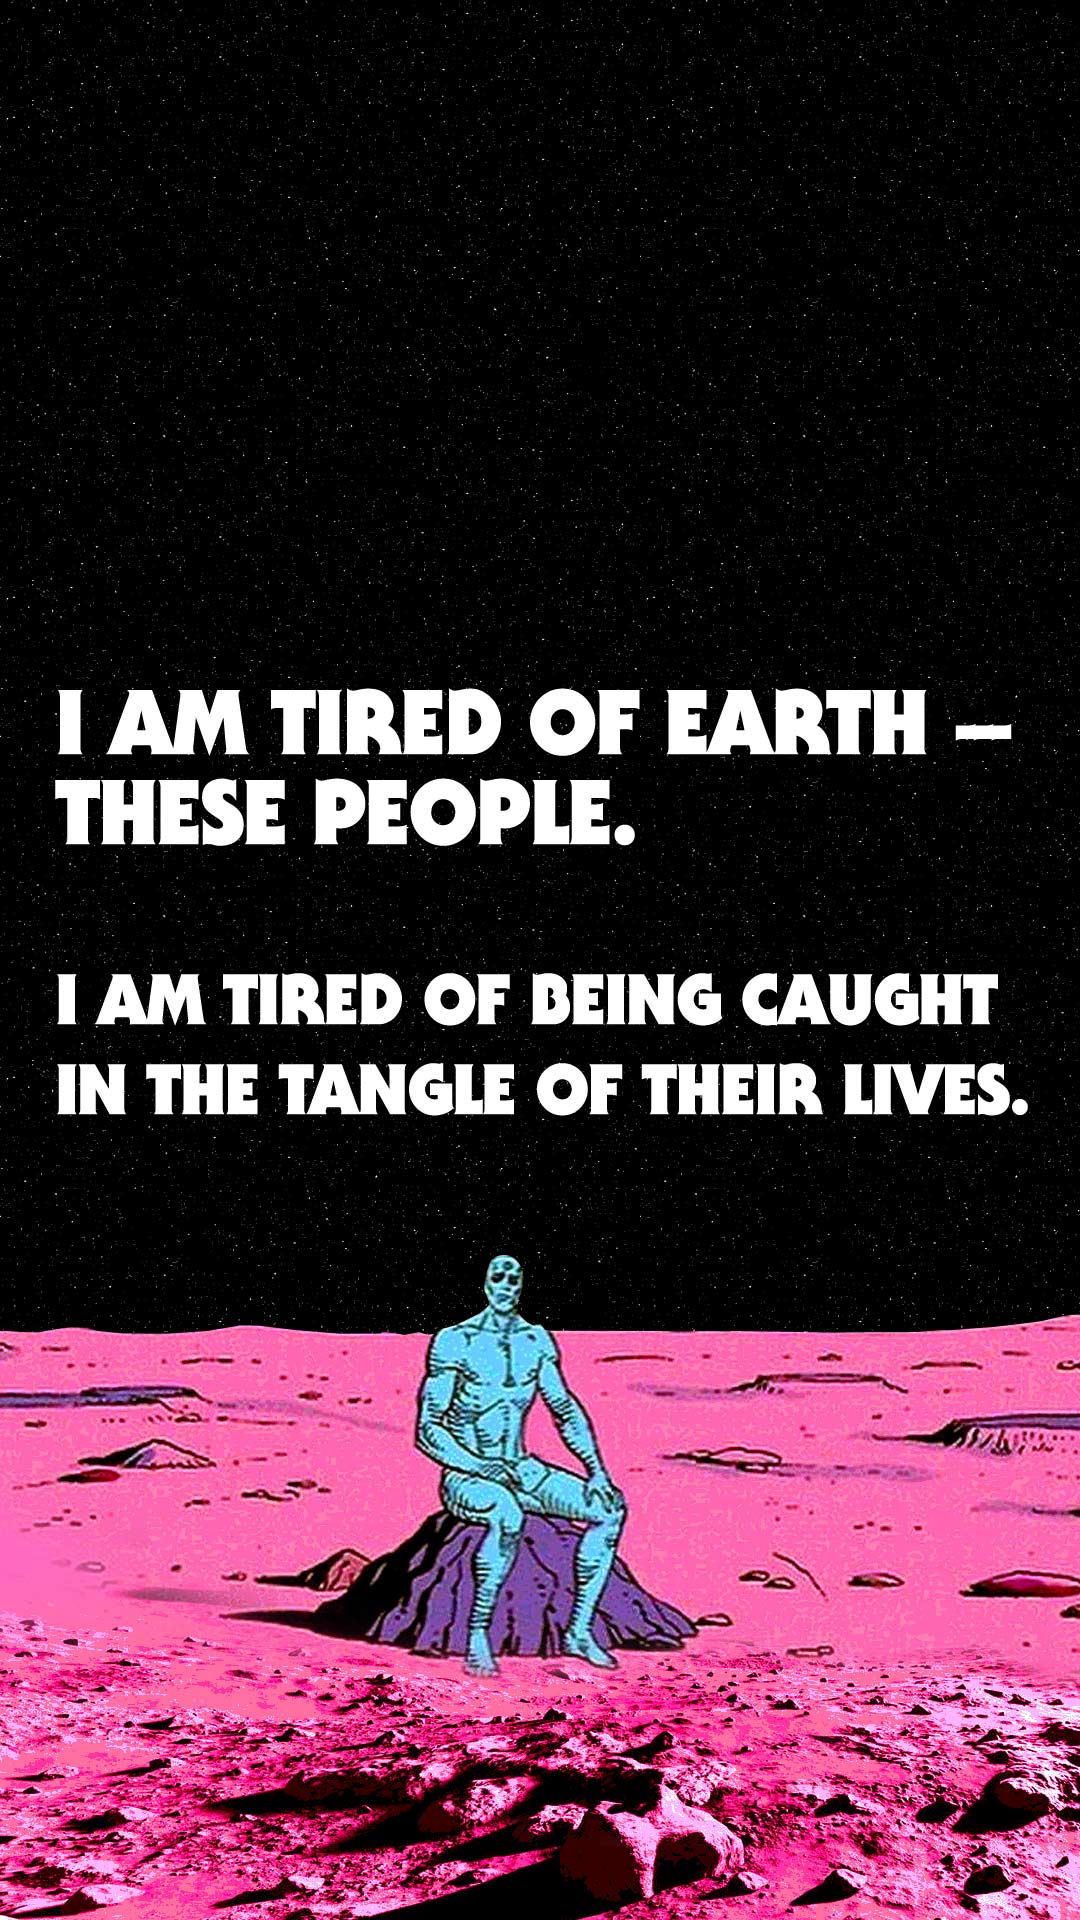 Mobile Wallpaper - Am Tired Of Earth These People Wallpapet - HD Wallpaper 